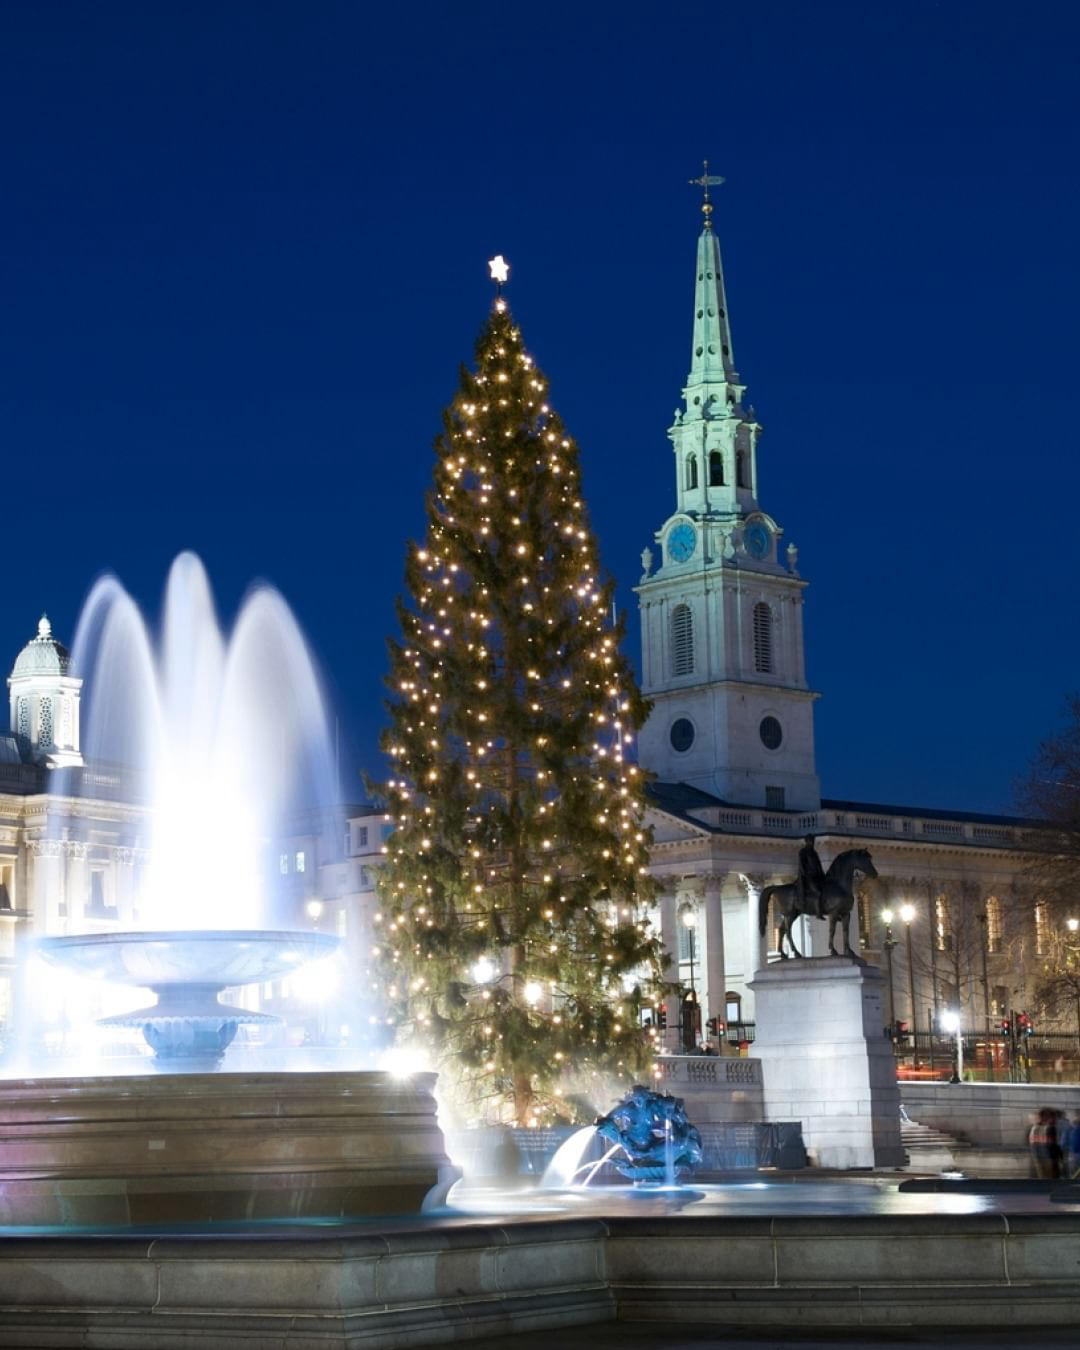 image  1 All through December you can see the Norwegian Christmas tree at Trafalgar Square in London